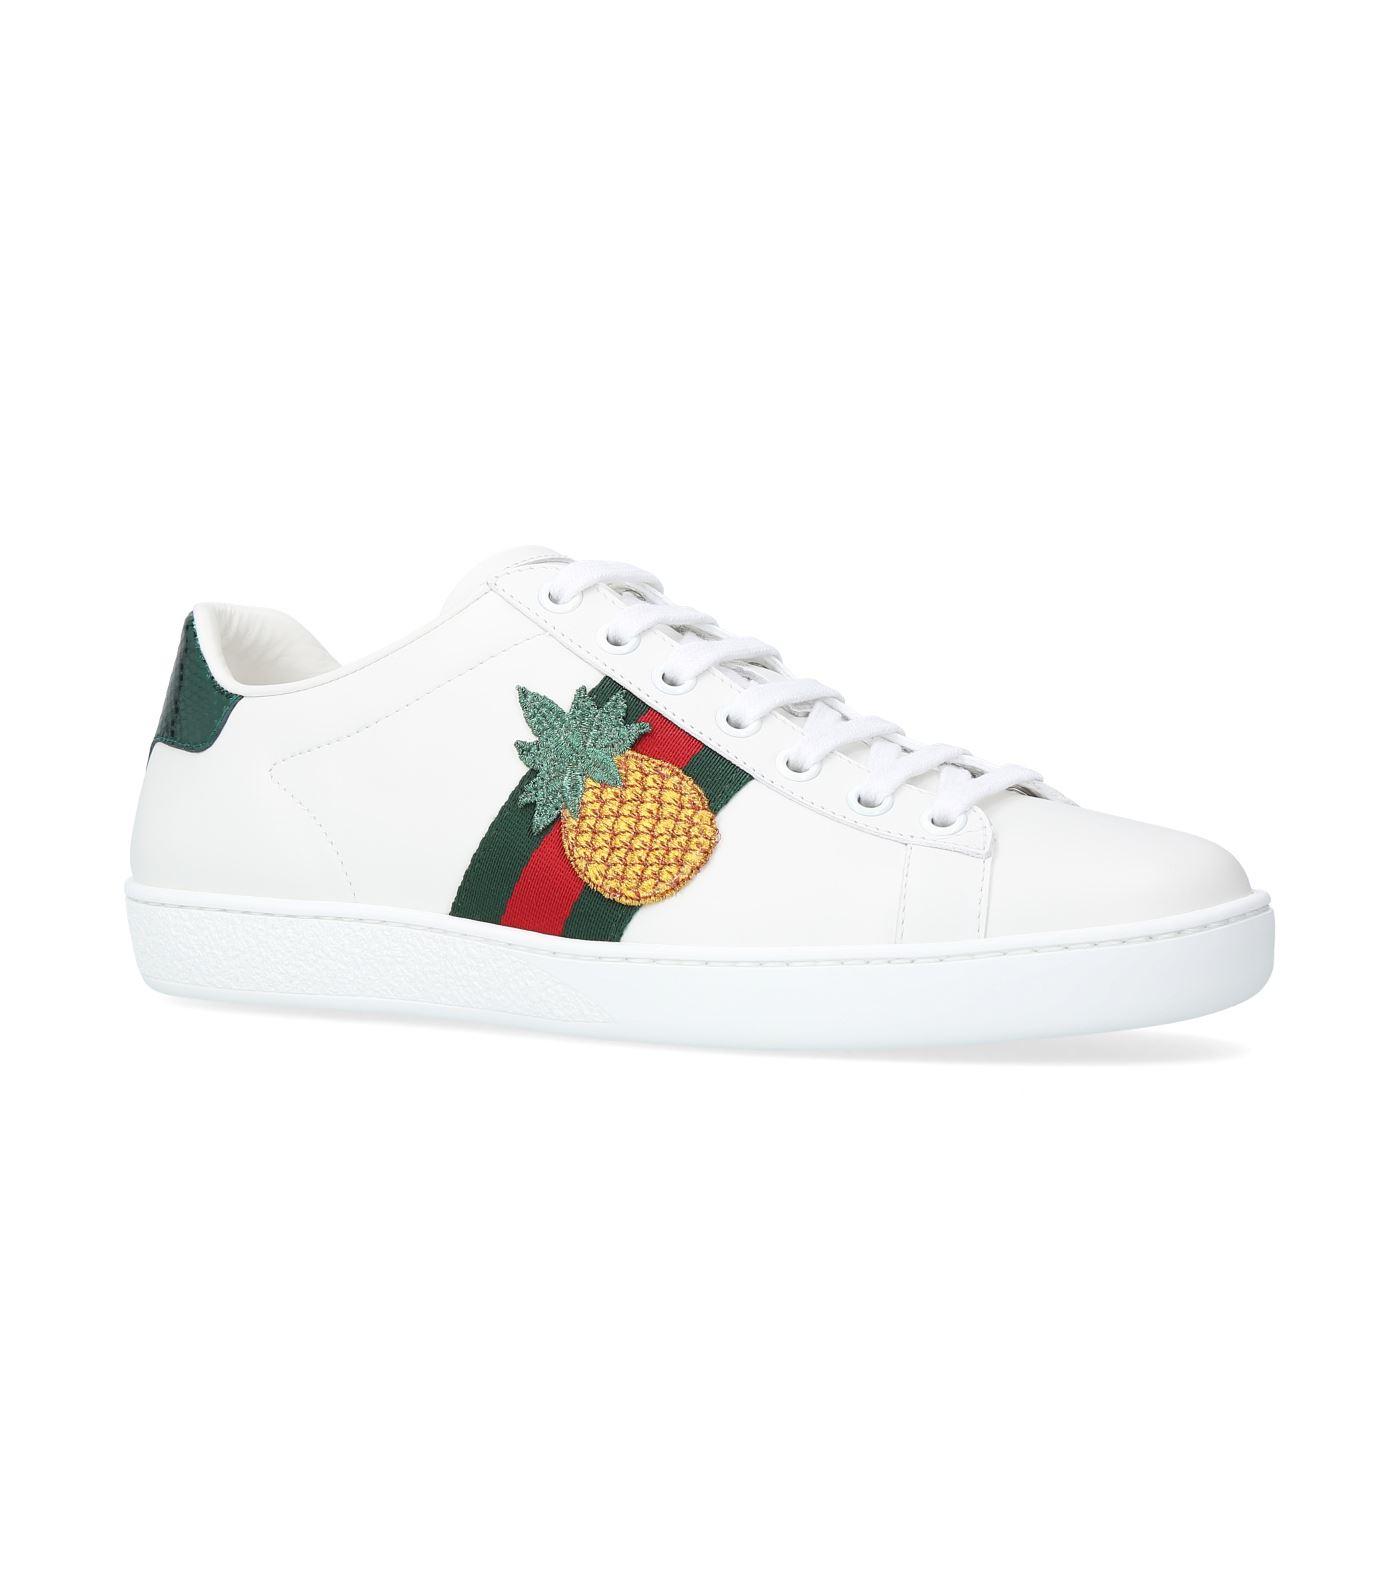 Gucci New Ace Pineapple Sneakers in White | Lyst